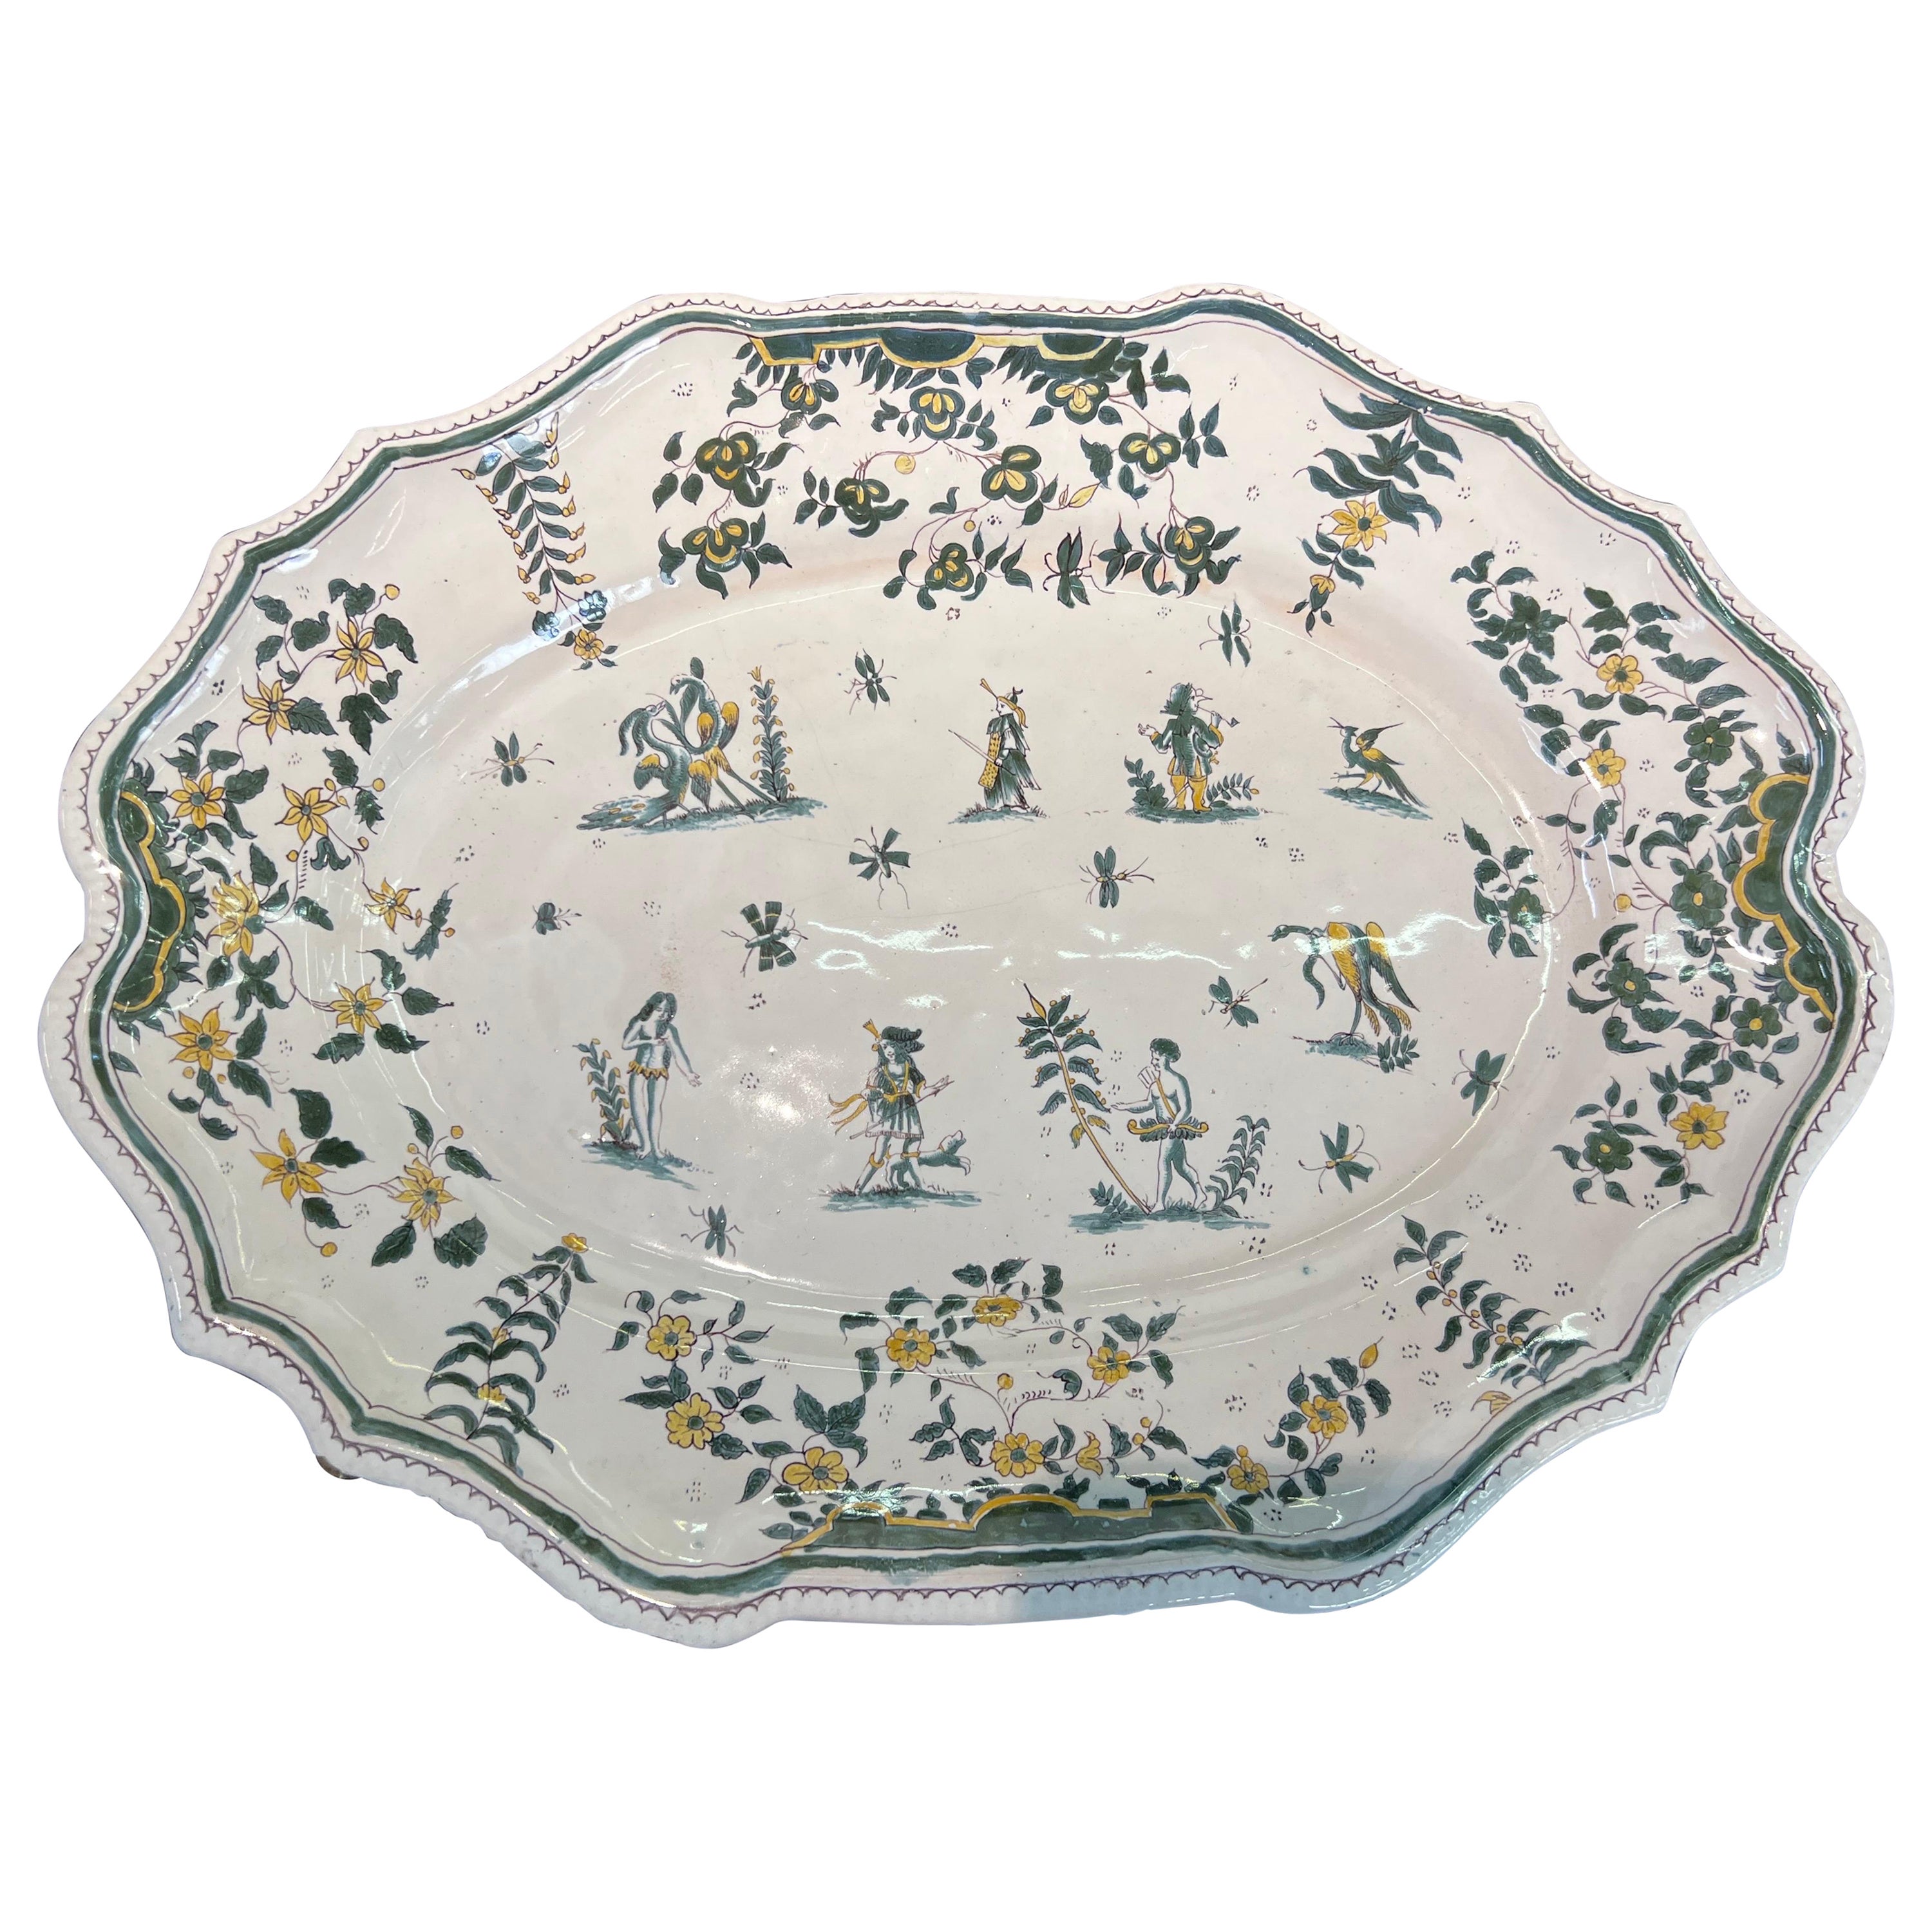 Great 18th Century Polychrome French Faience Platter For Sale